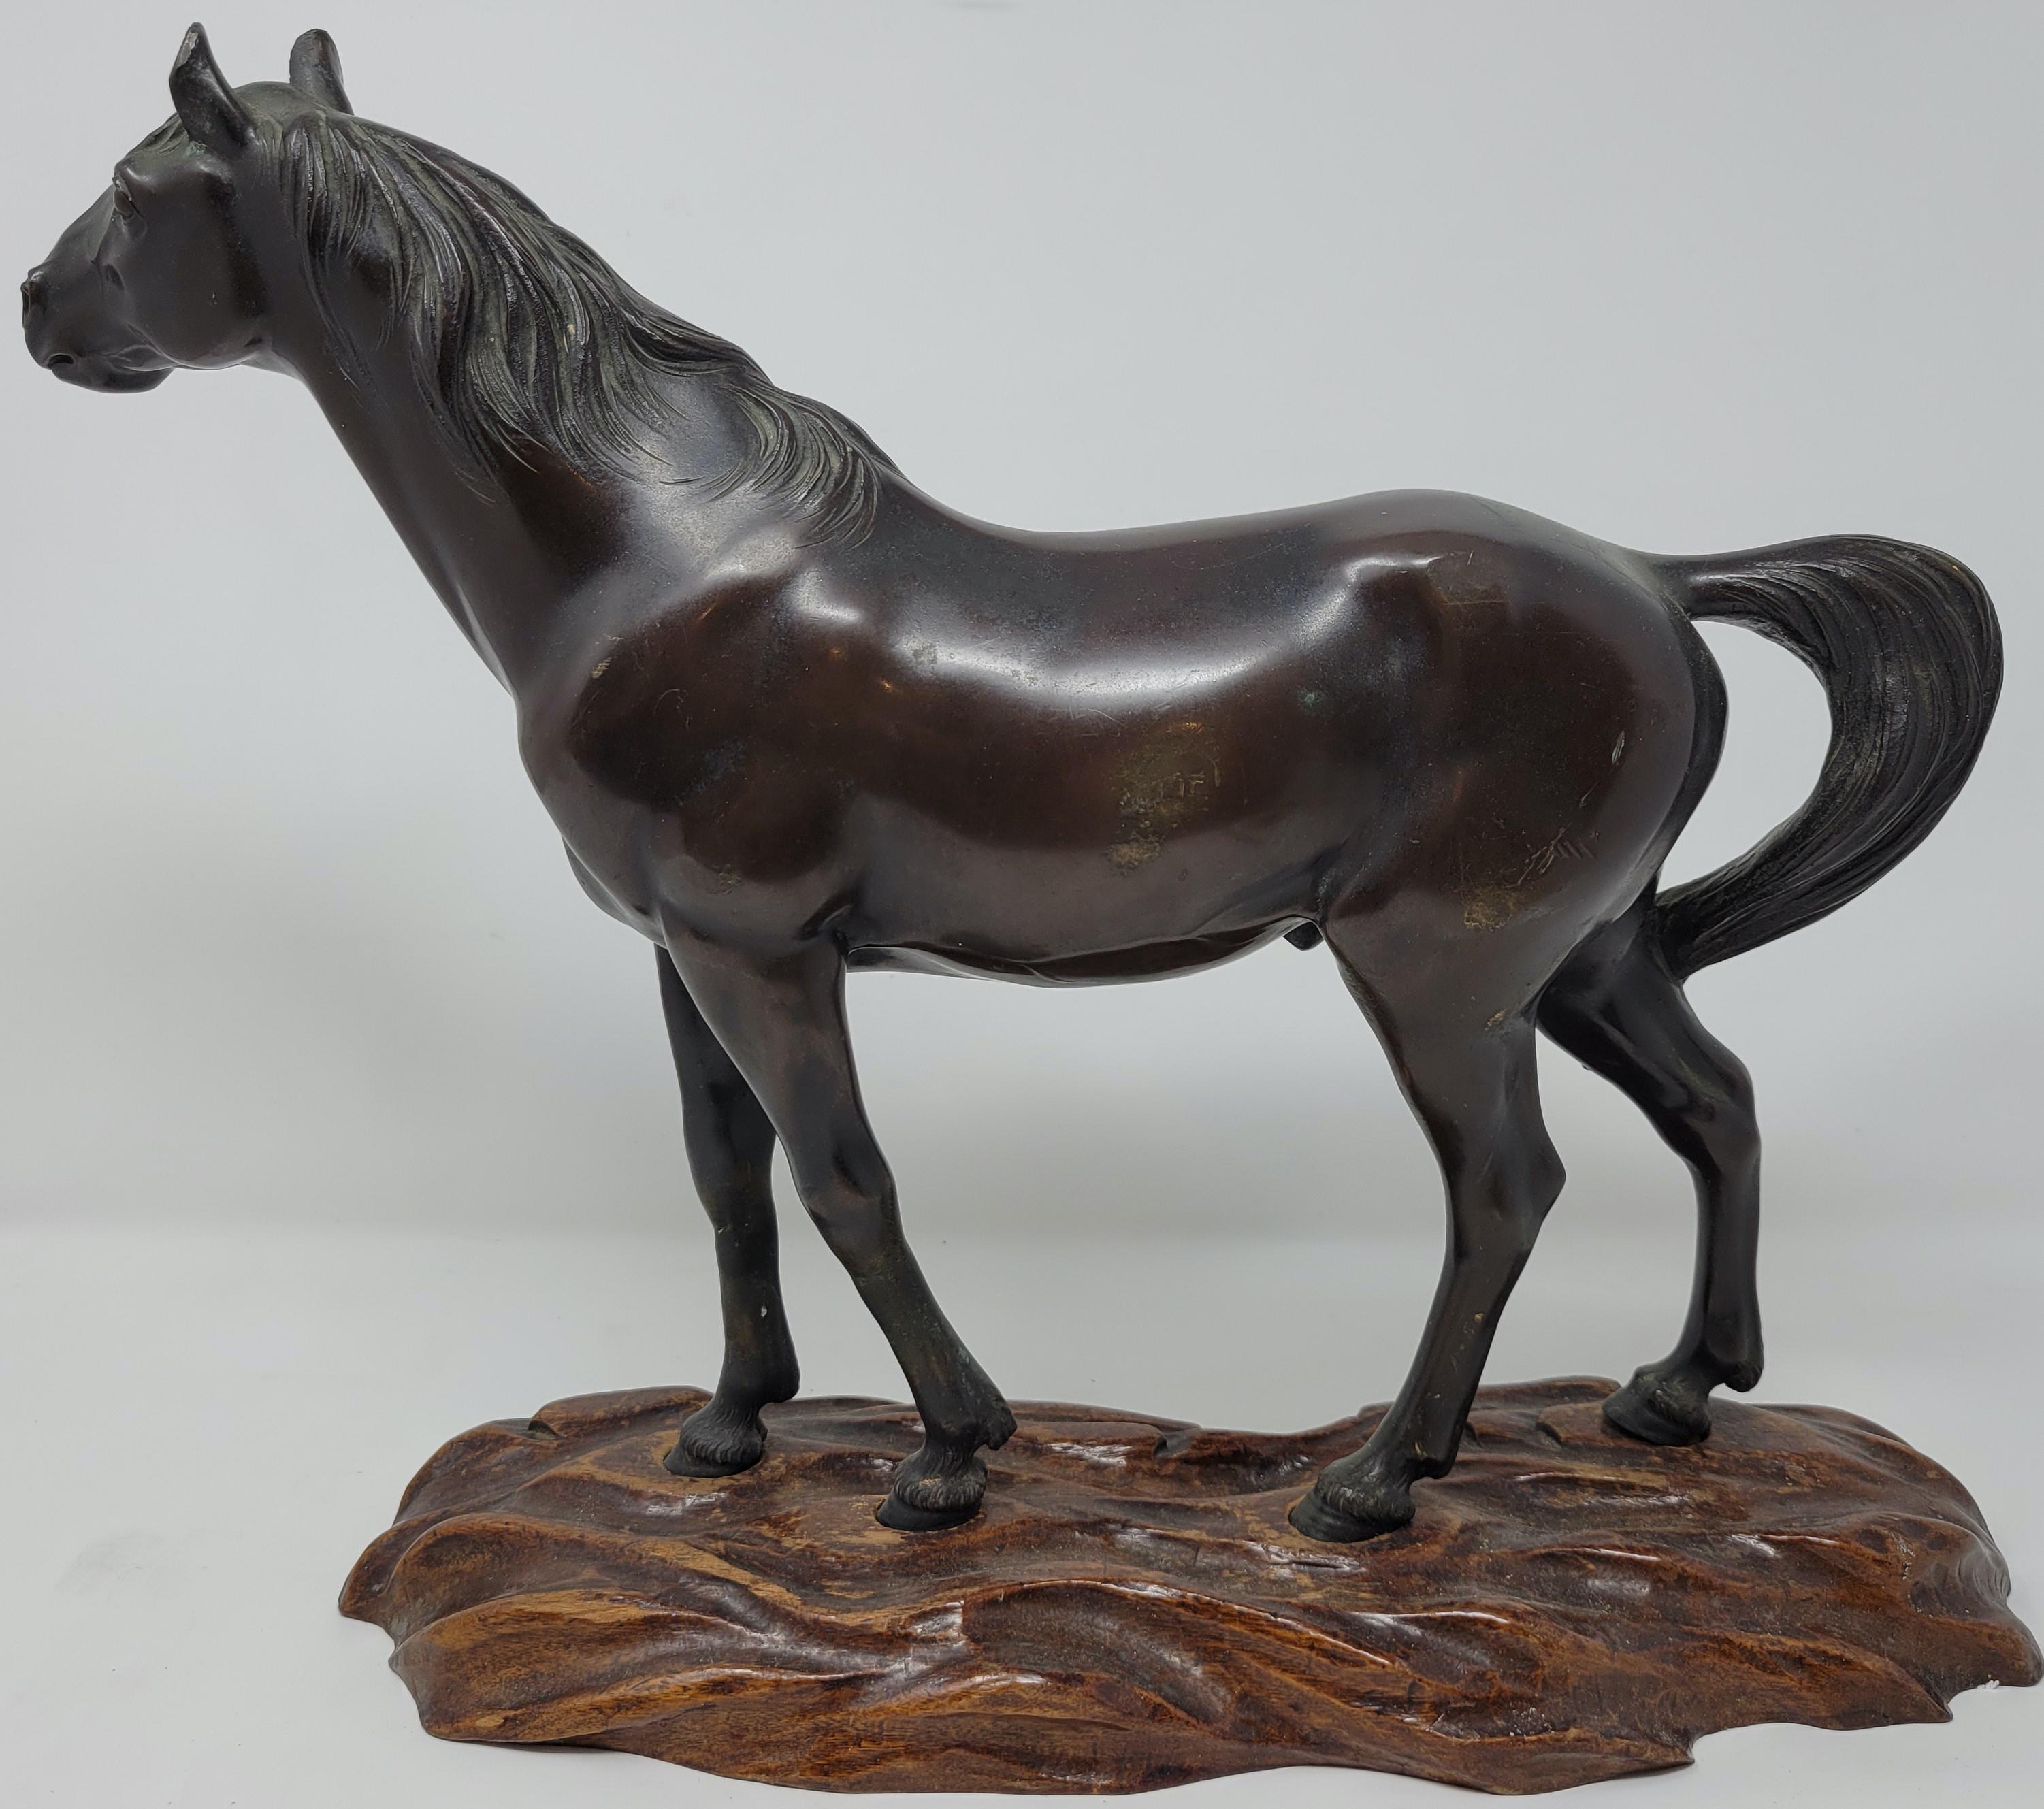 Antique 19th century Japanese bronze horse on hand-carved wooden base.
   